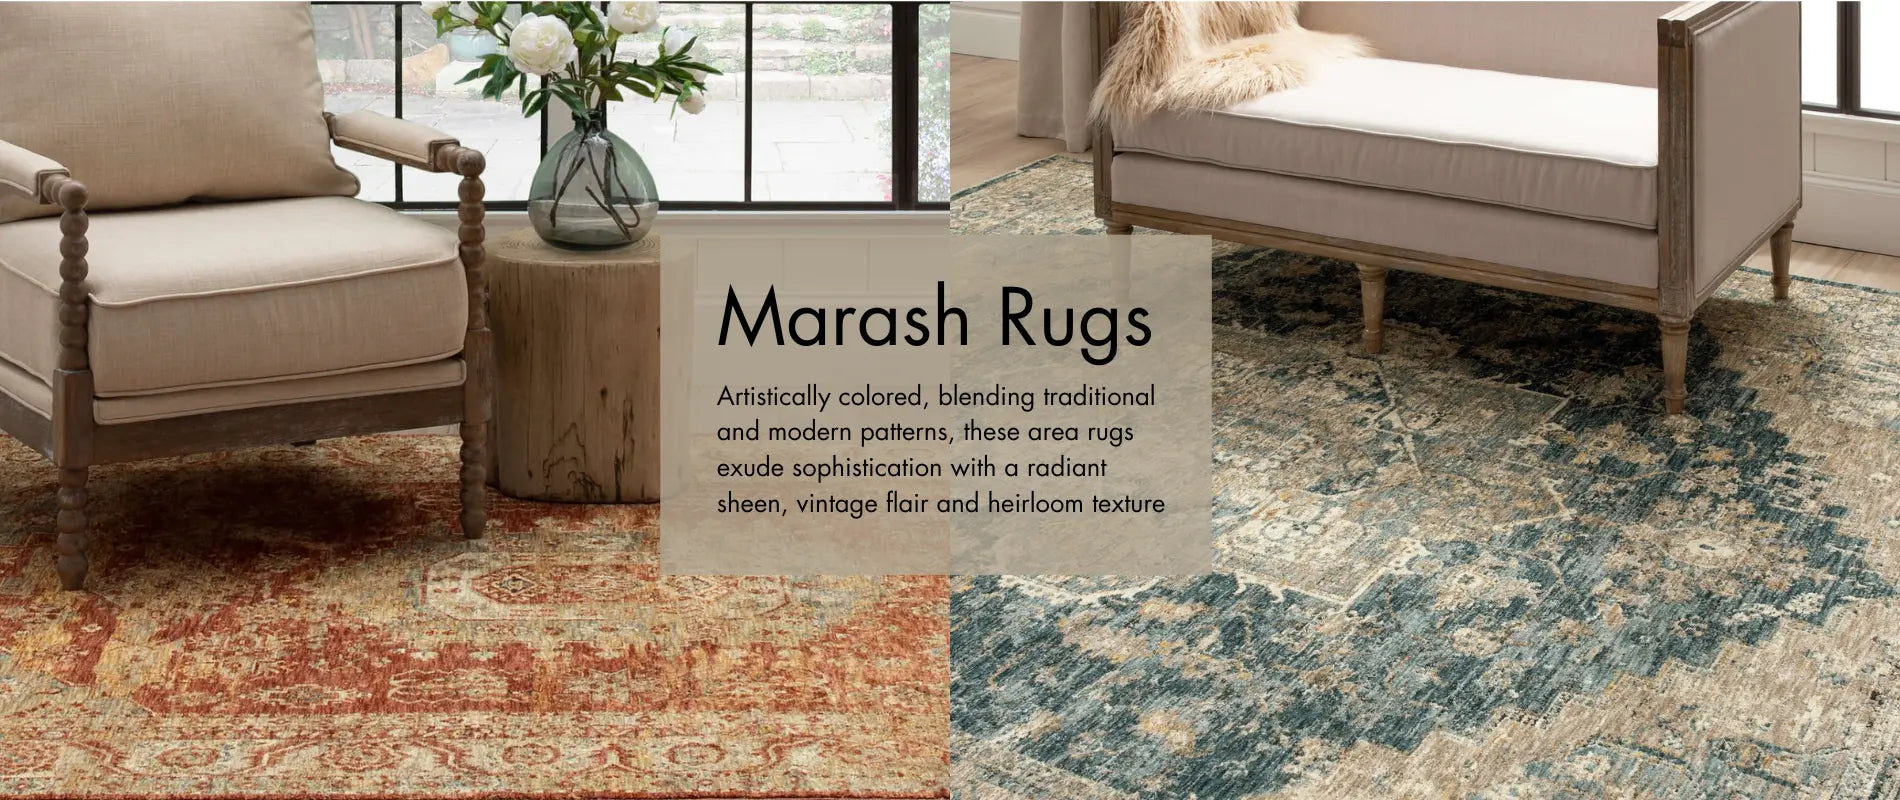 Radiant polyester area rugs with traditional-modern blend, light-catching sheen, micro-fringe finish, imported from Turkey for a vintage look